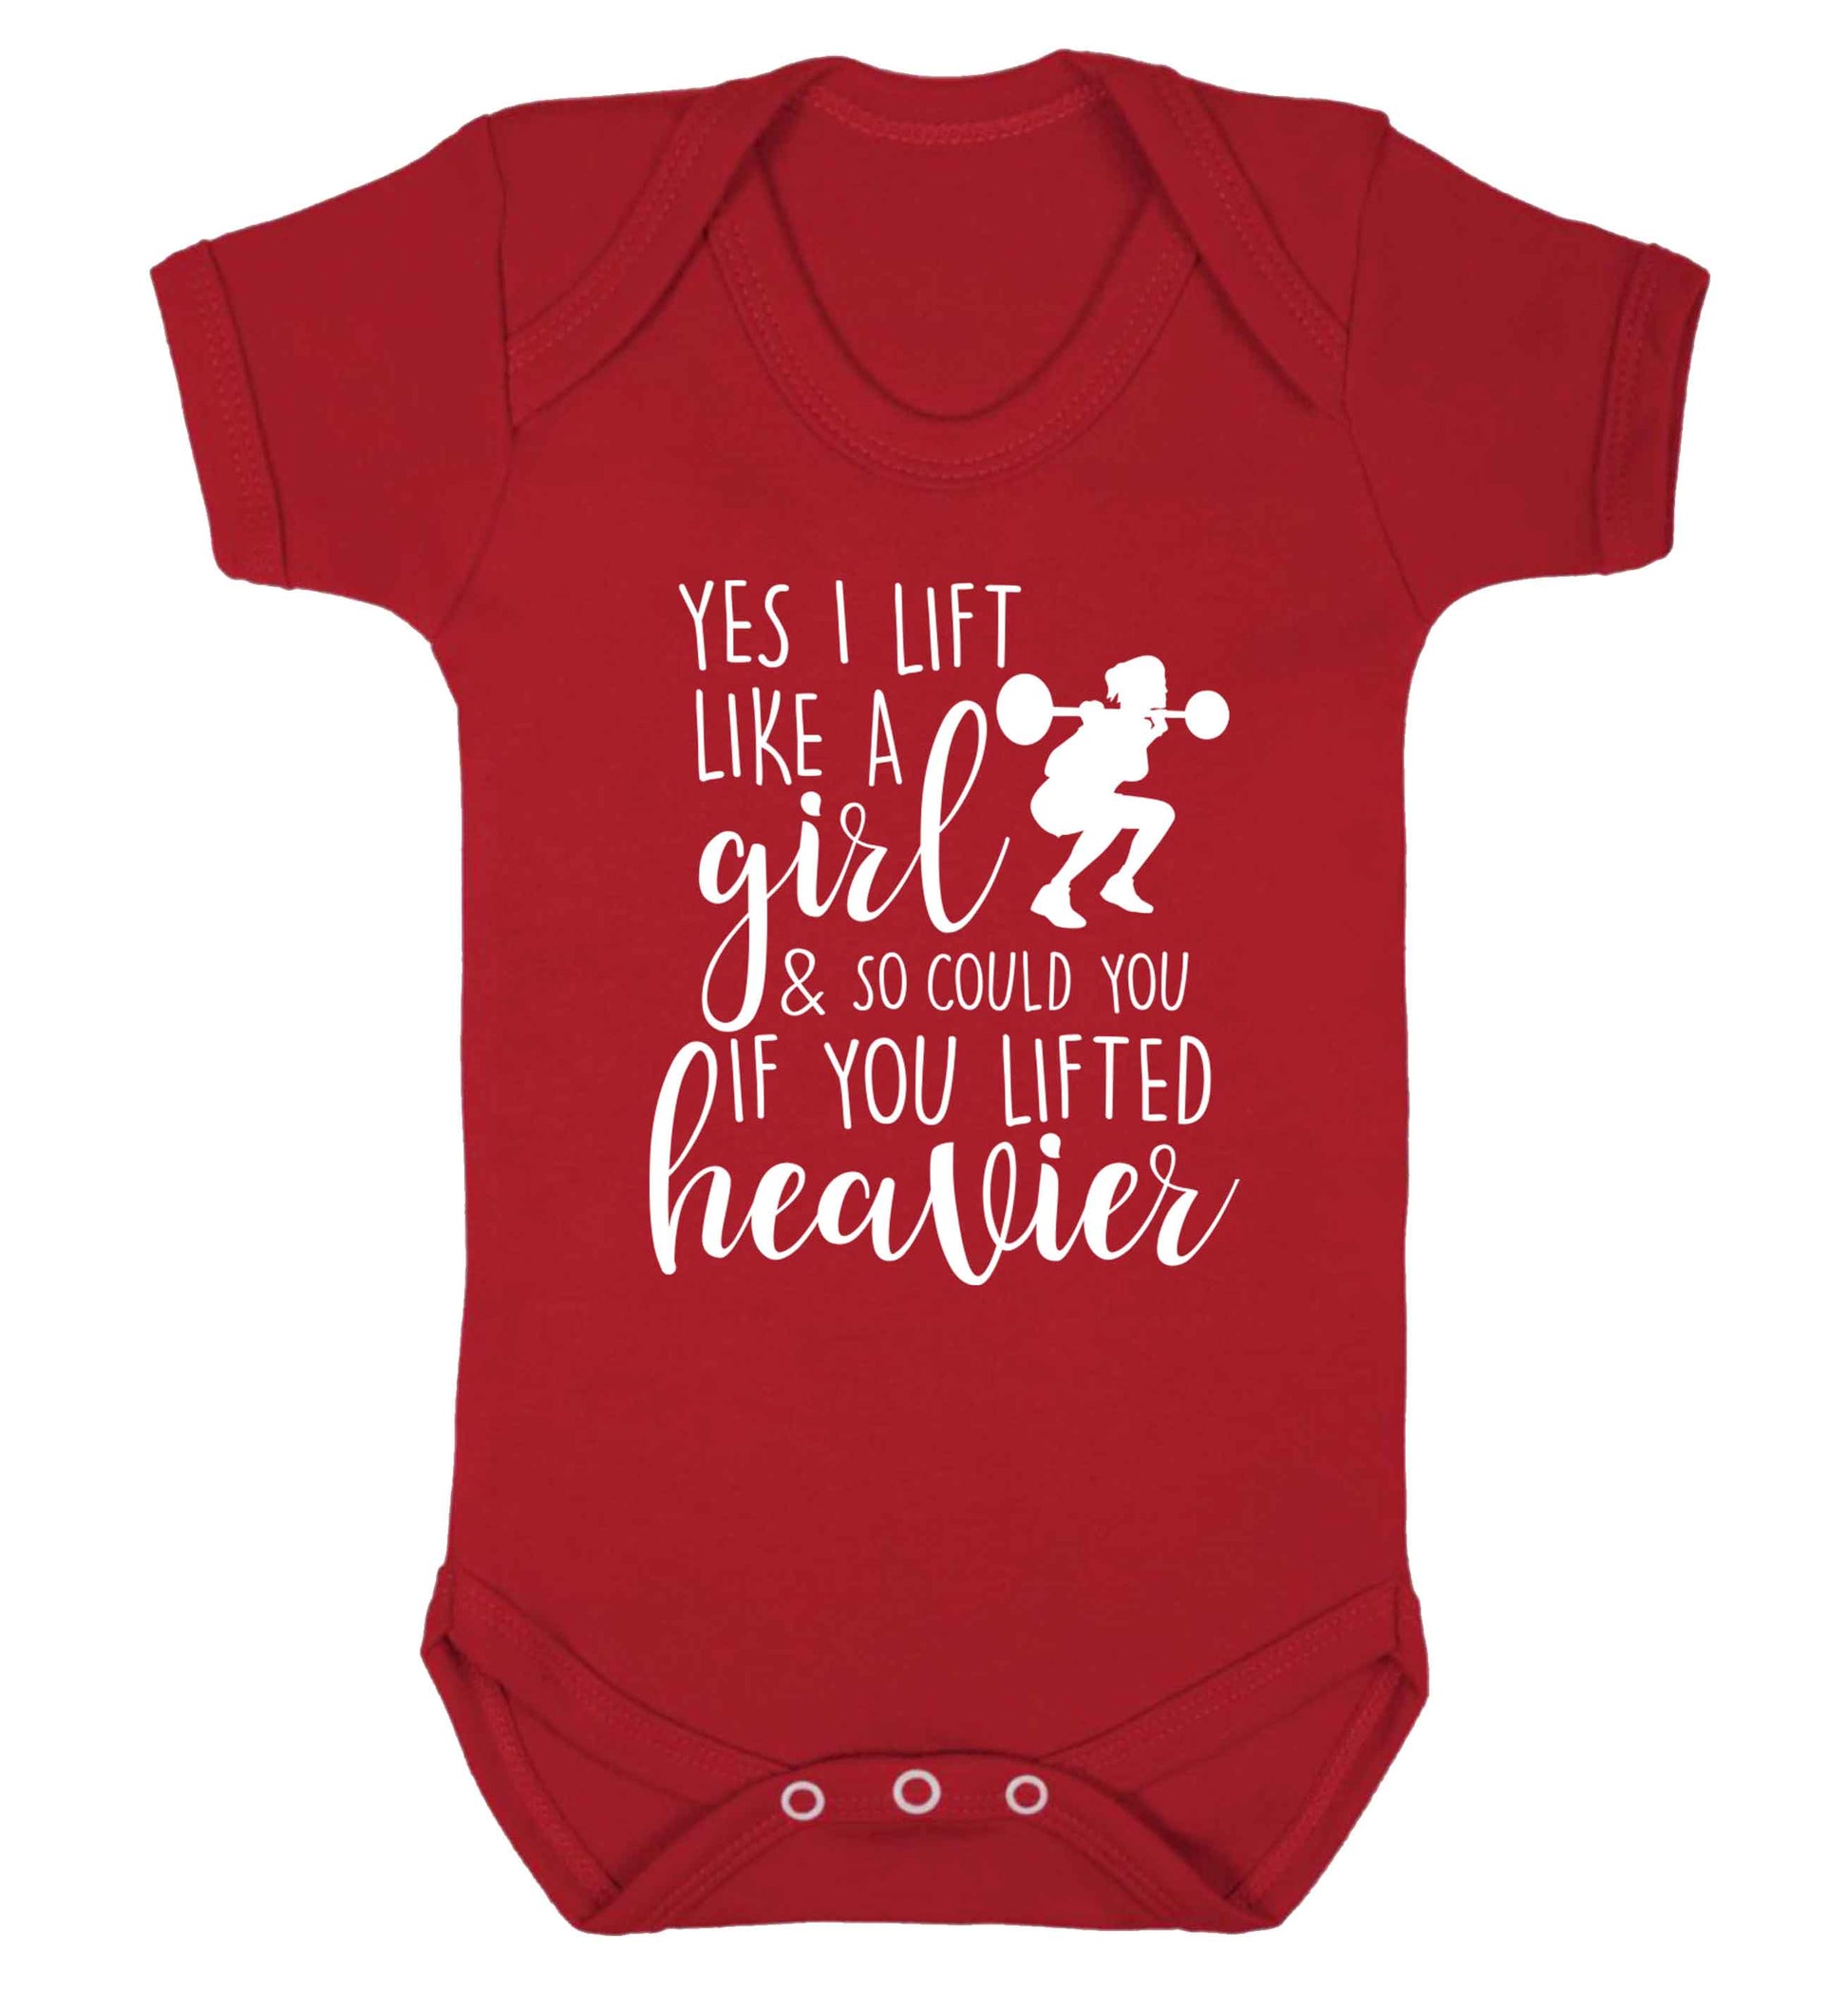 Yes I lift like a girl and so could you if you lifted heavier Baby Vest red 18-24 months